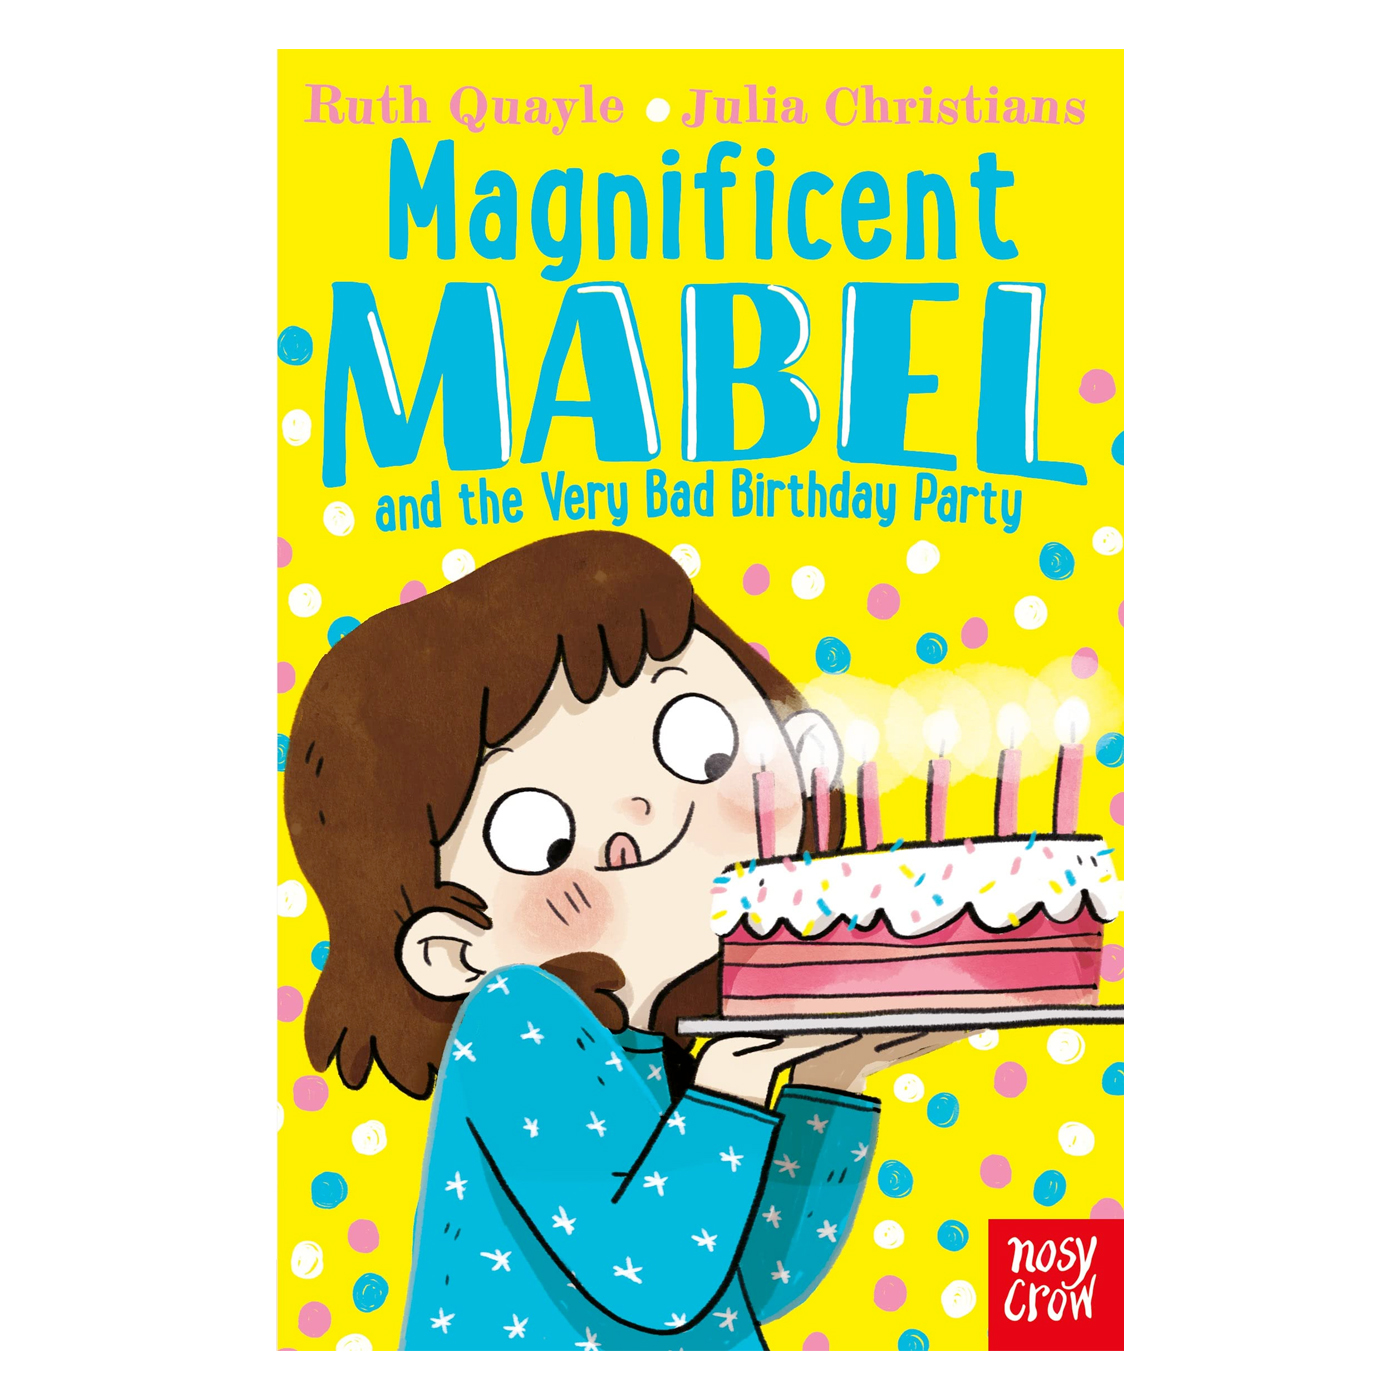  Magnificent Mabel and the Very Bad Birthday Party